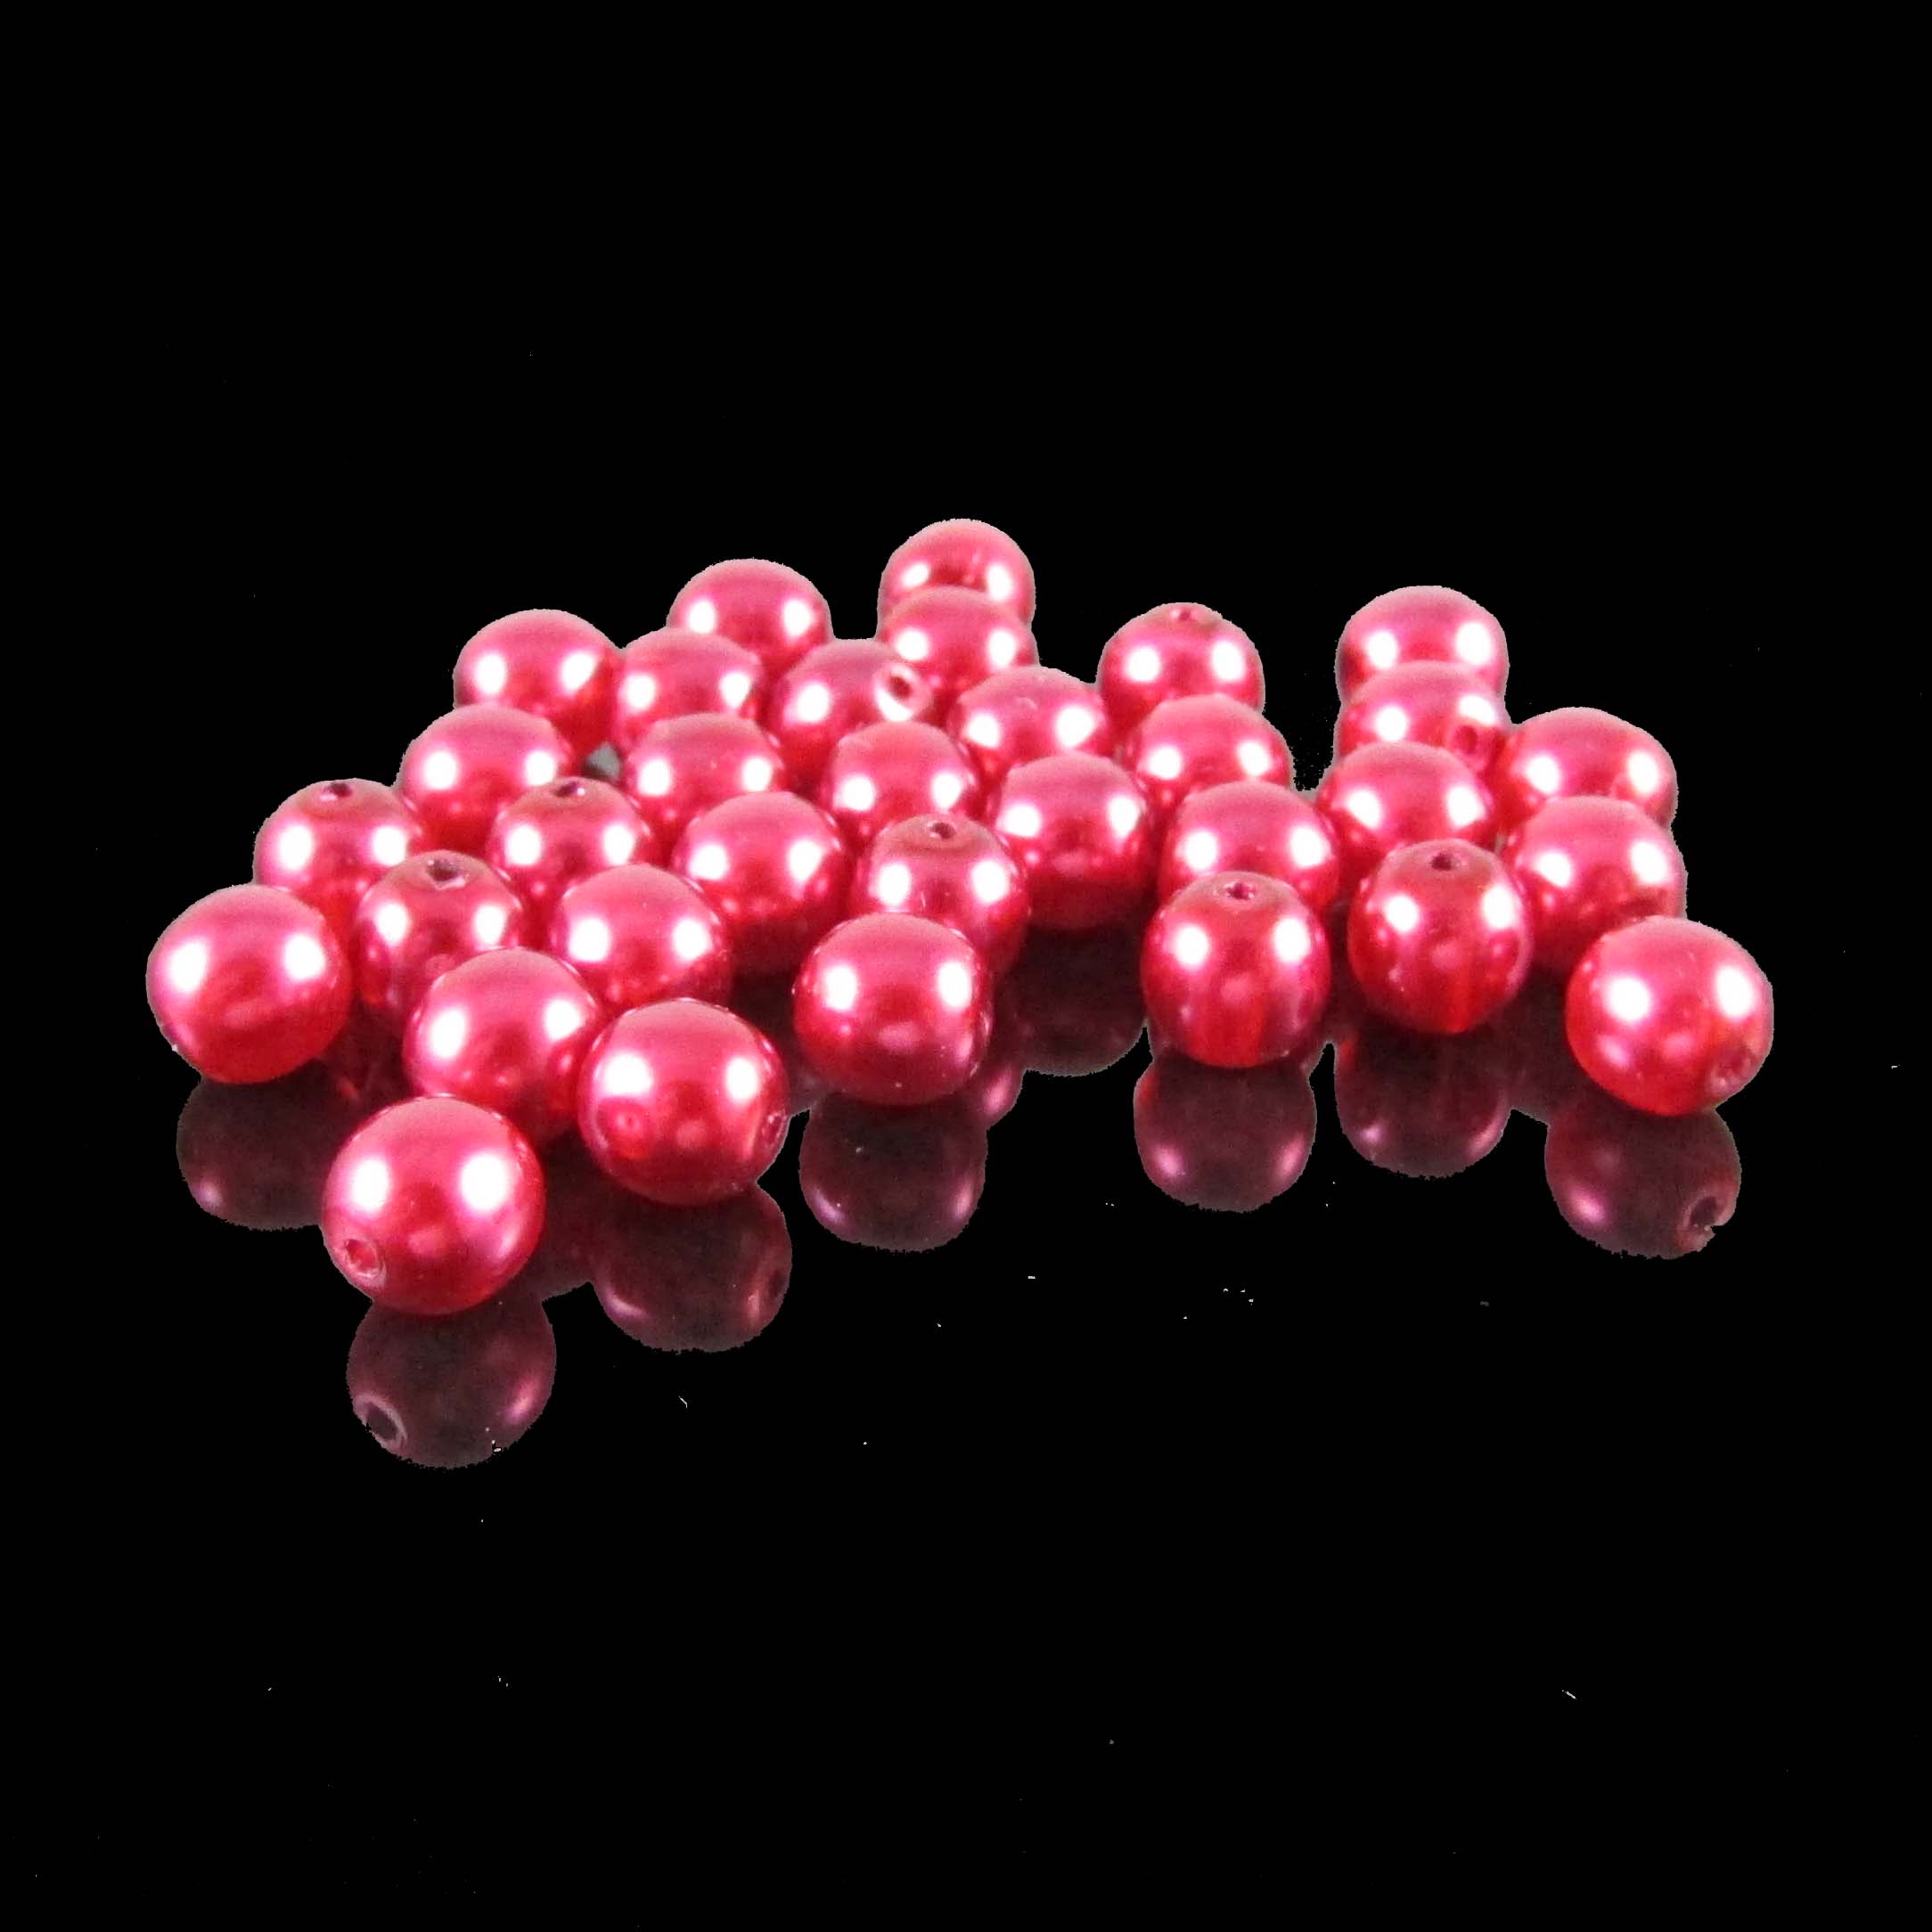 Czech Glass Druk Large Hole Beads in size 6mm, Red Coral Opaque